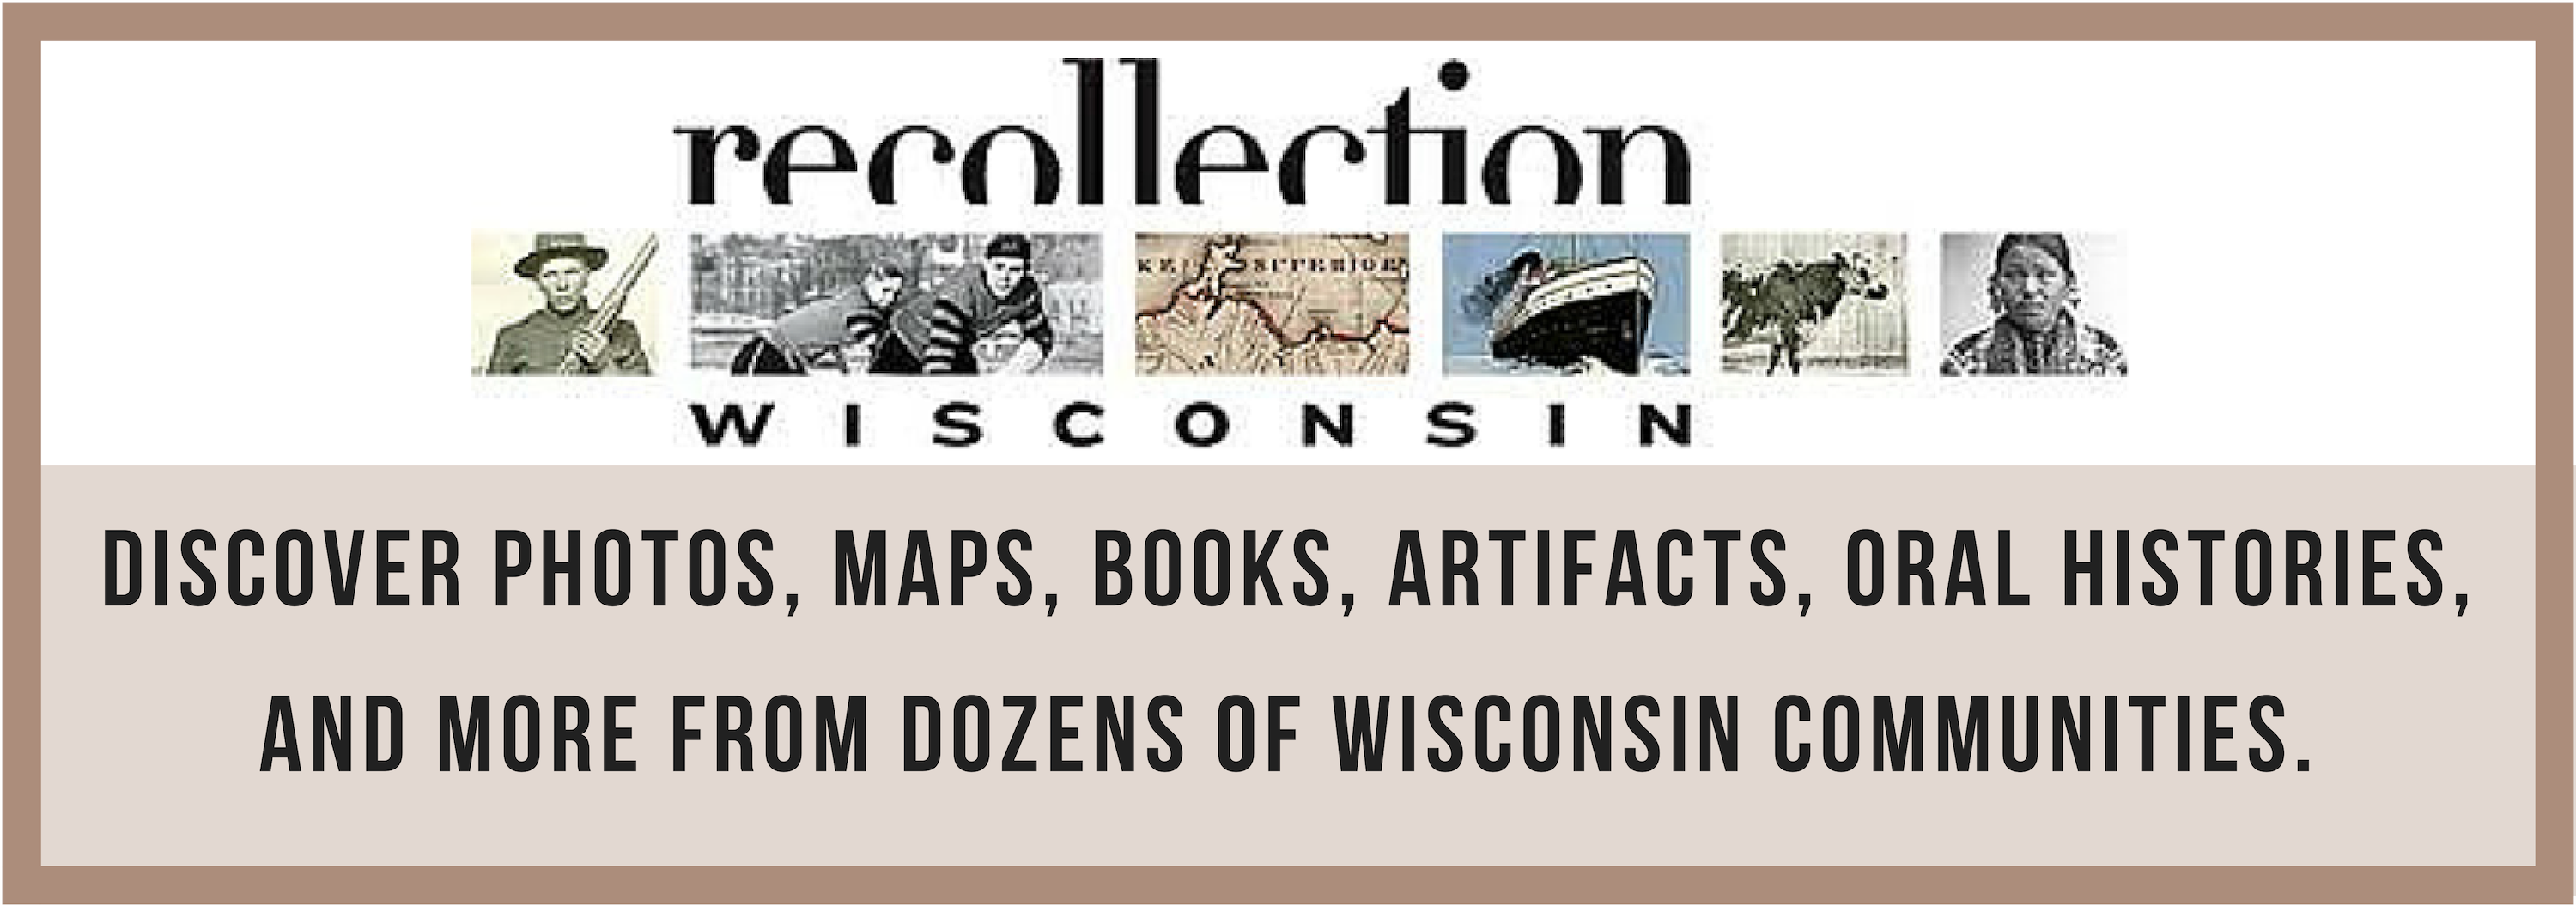 Recollection Wisconsin logo and tagline